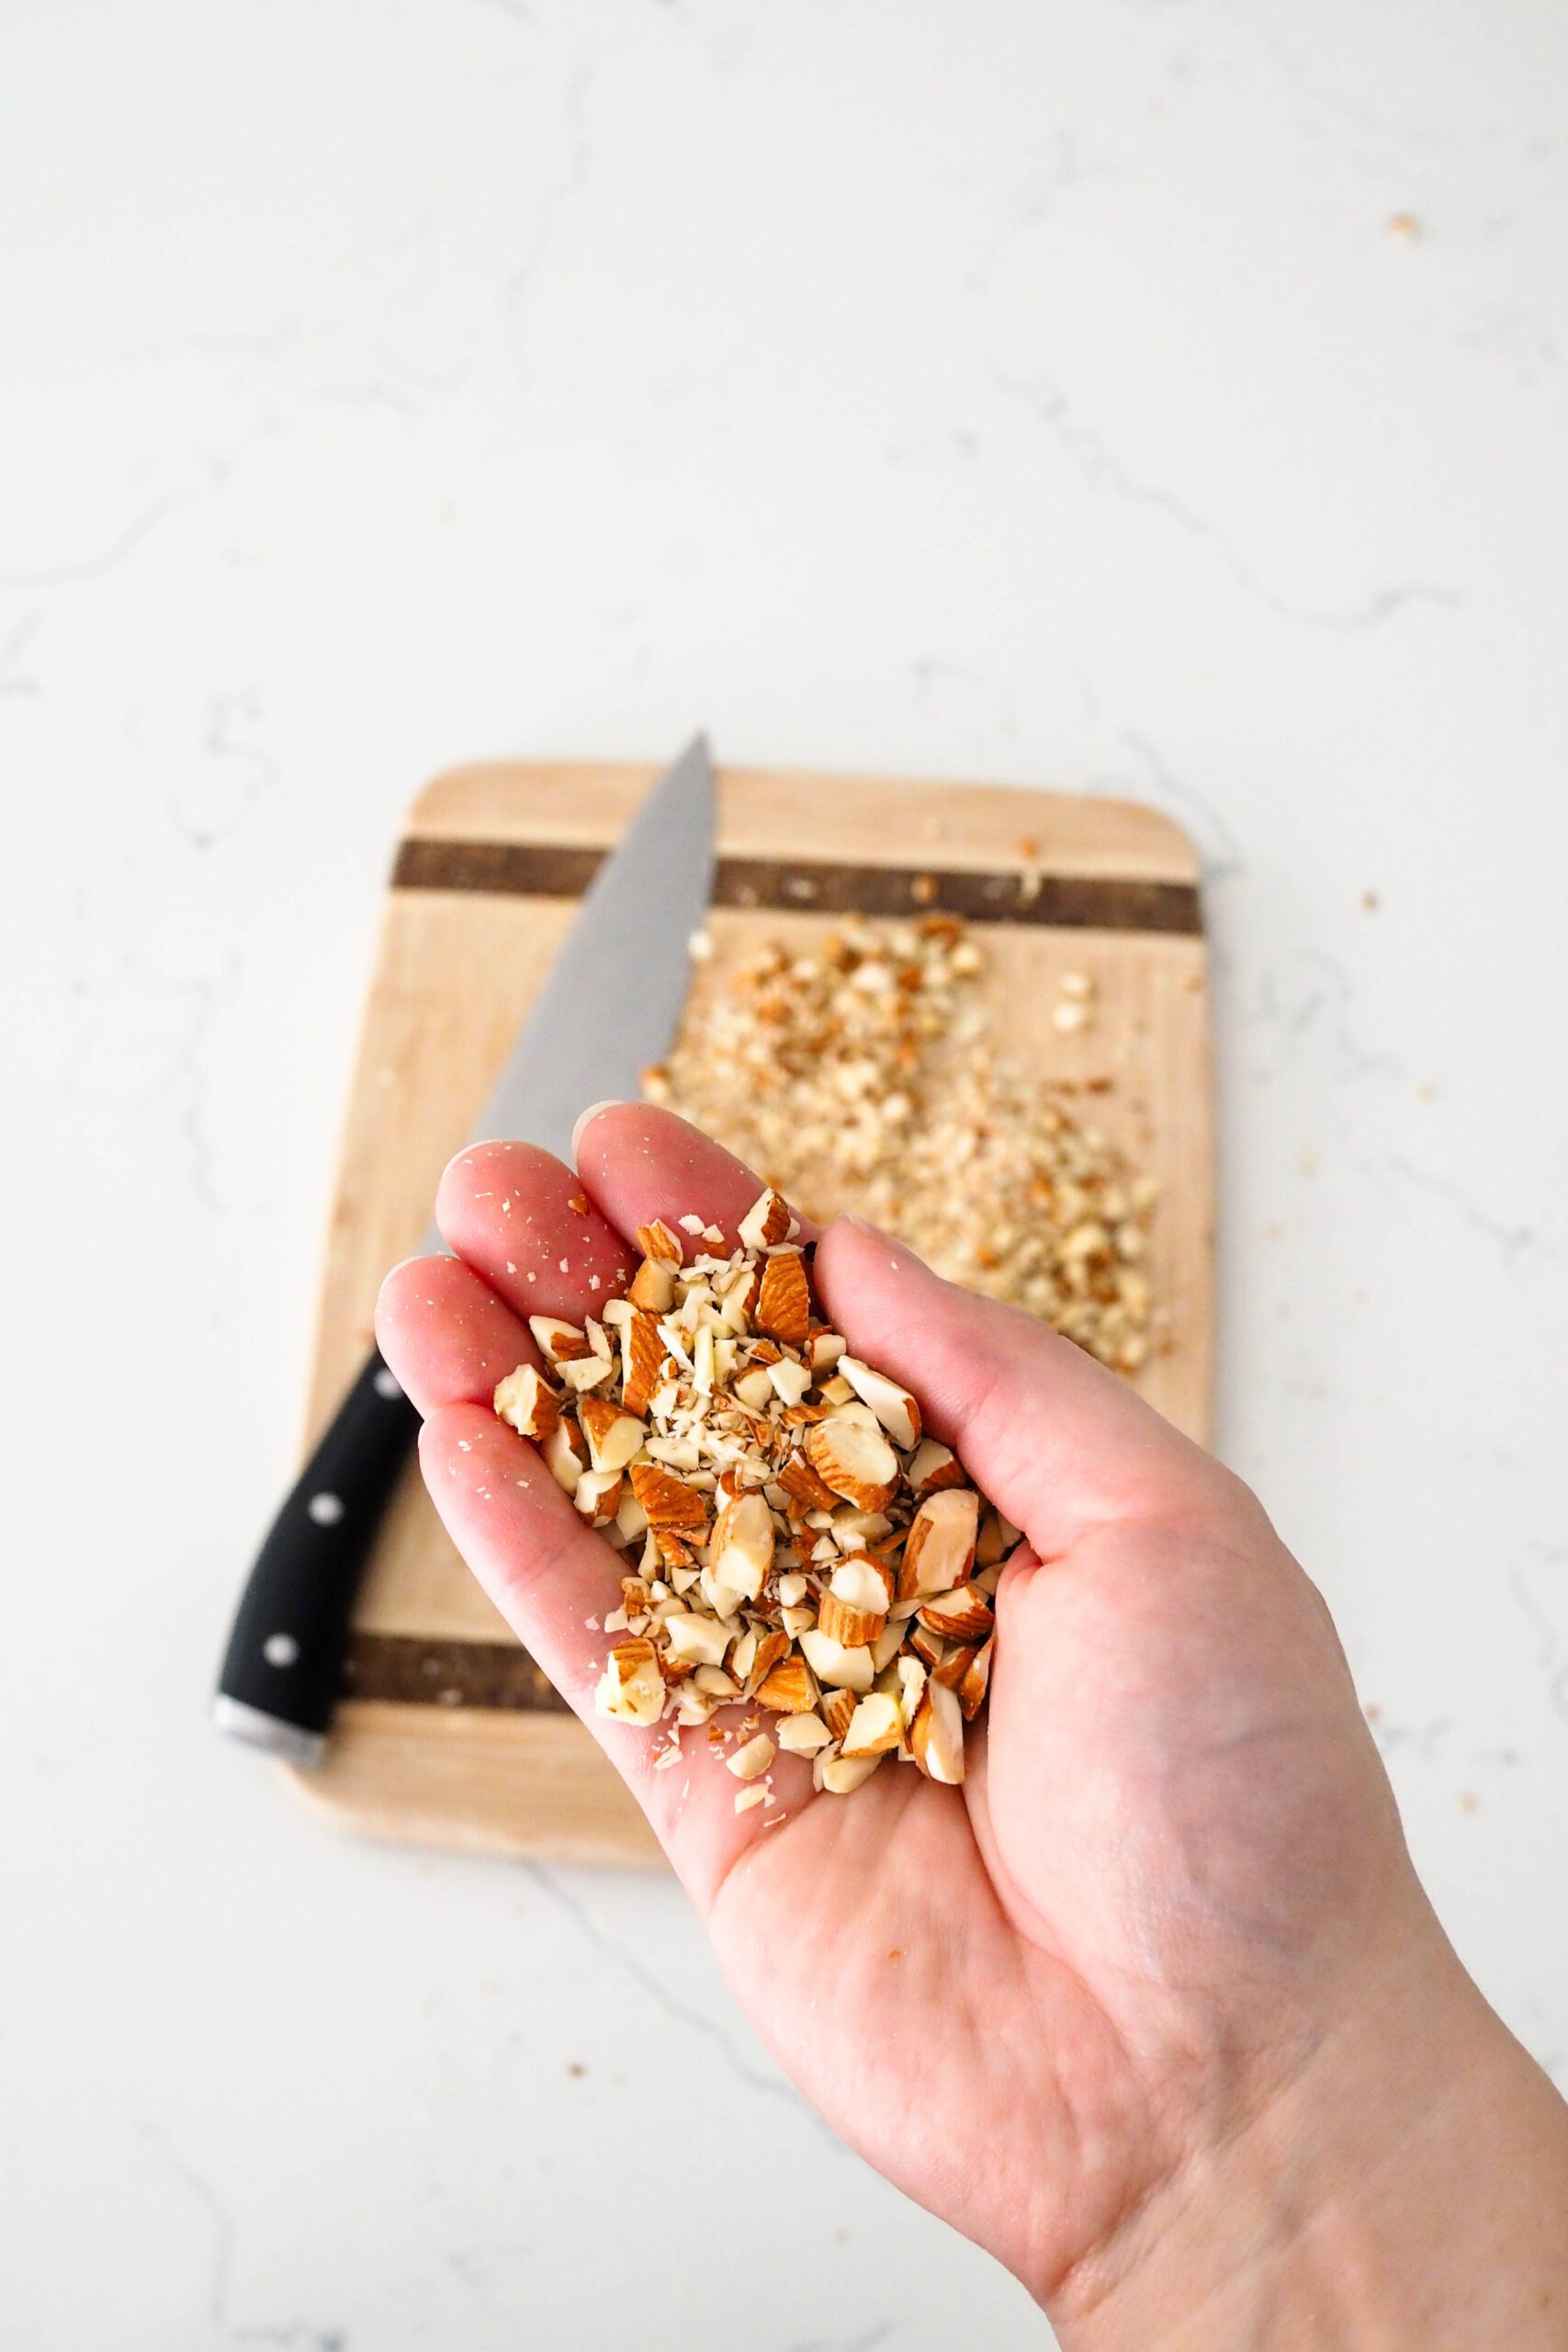 A hand holds up chopped almonds in front of a cutting board and knife.